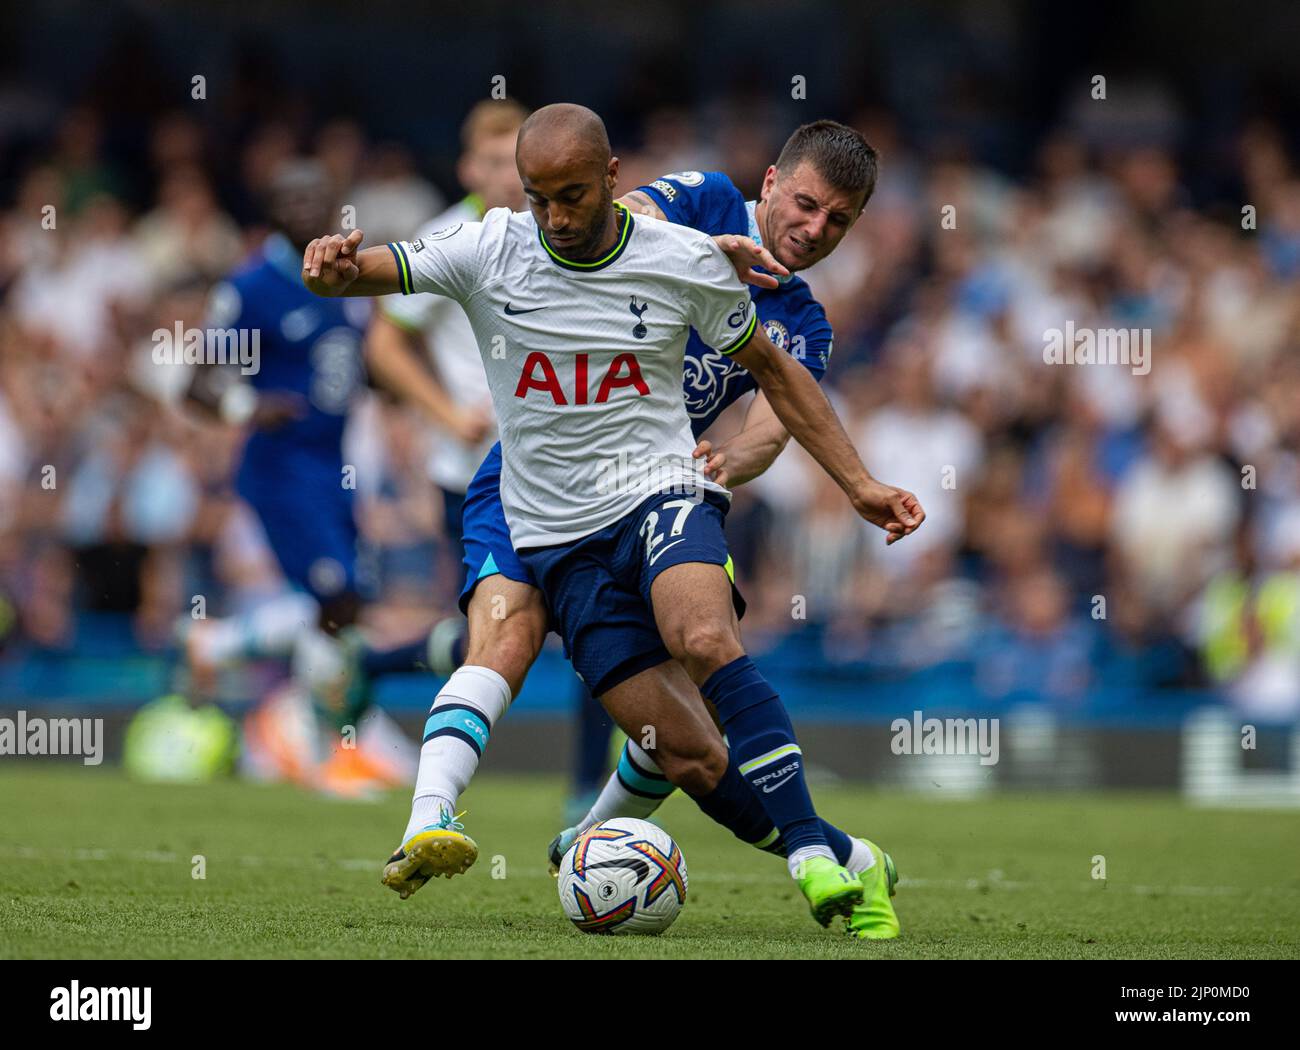 London, UK. 15th Aug, 2022. Tottenham Hotspur's Lucas Moura (L) is tackled by Chelsea's Mason Mount during the English Premier League match between Chelsea and Tottenham Hotspur in London, Britain, on Aug. 14, 2022. The game ended in a 2-2 draw. Credit: Xinhua/Alamy Live News Stock Photo